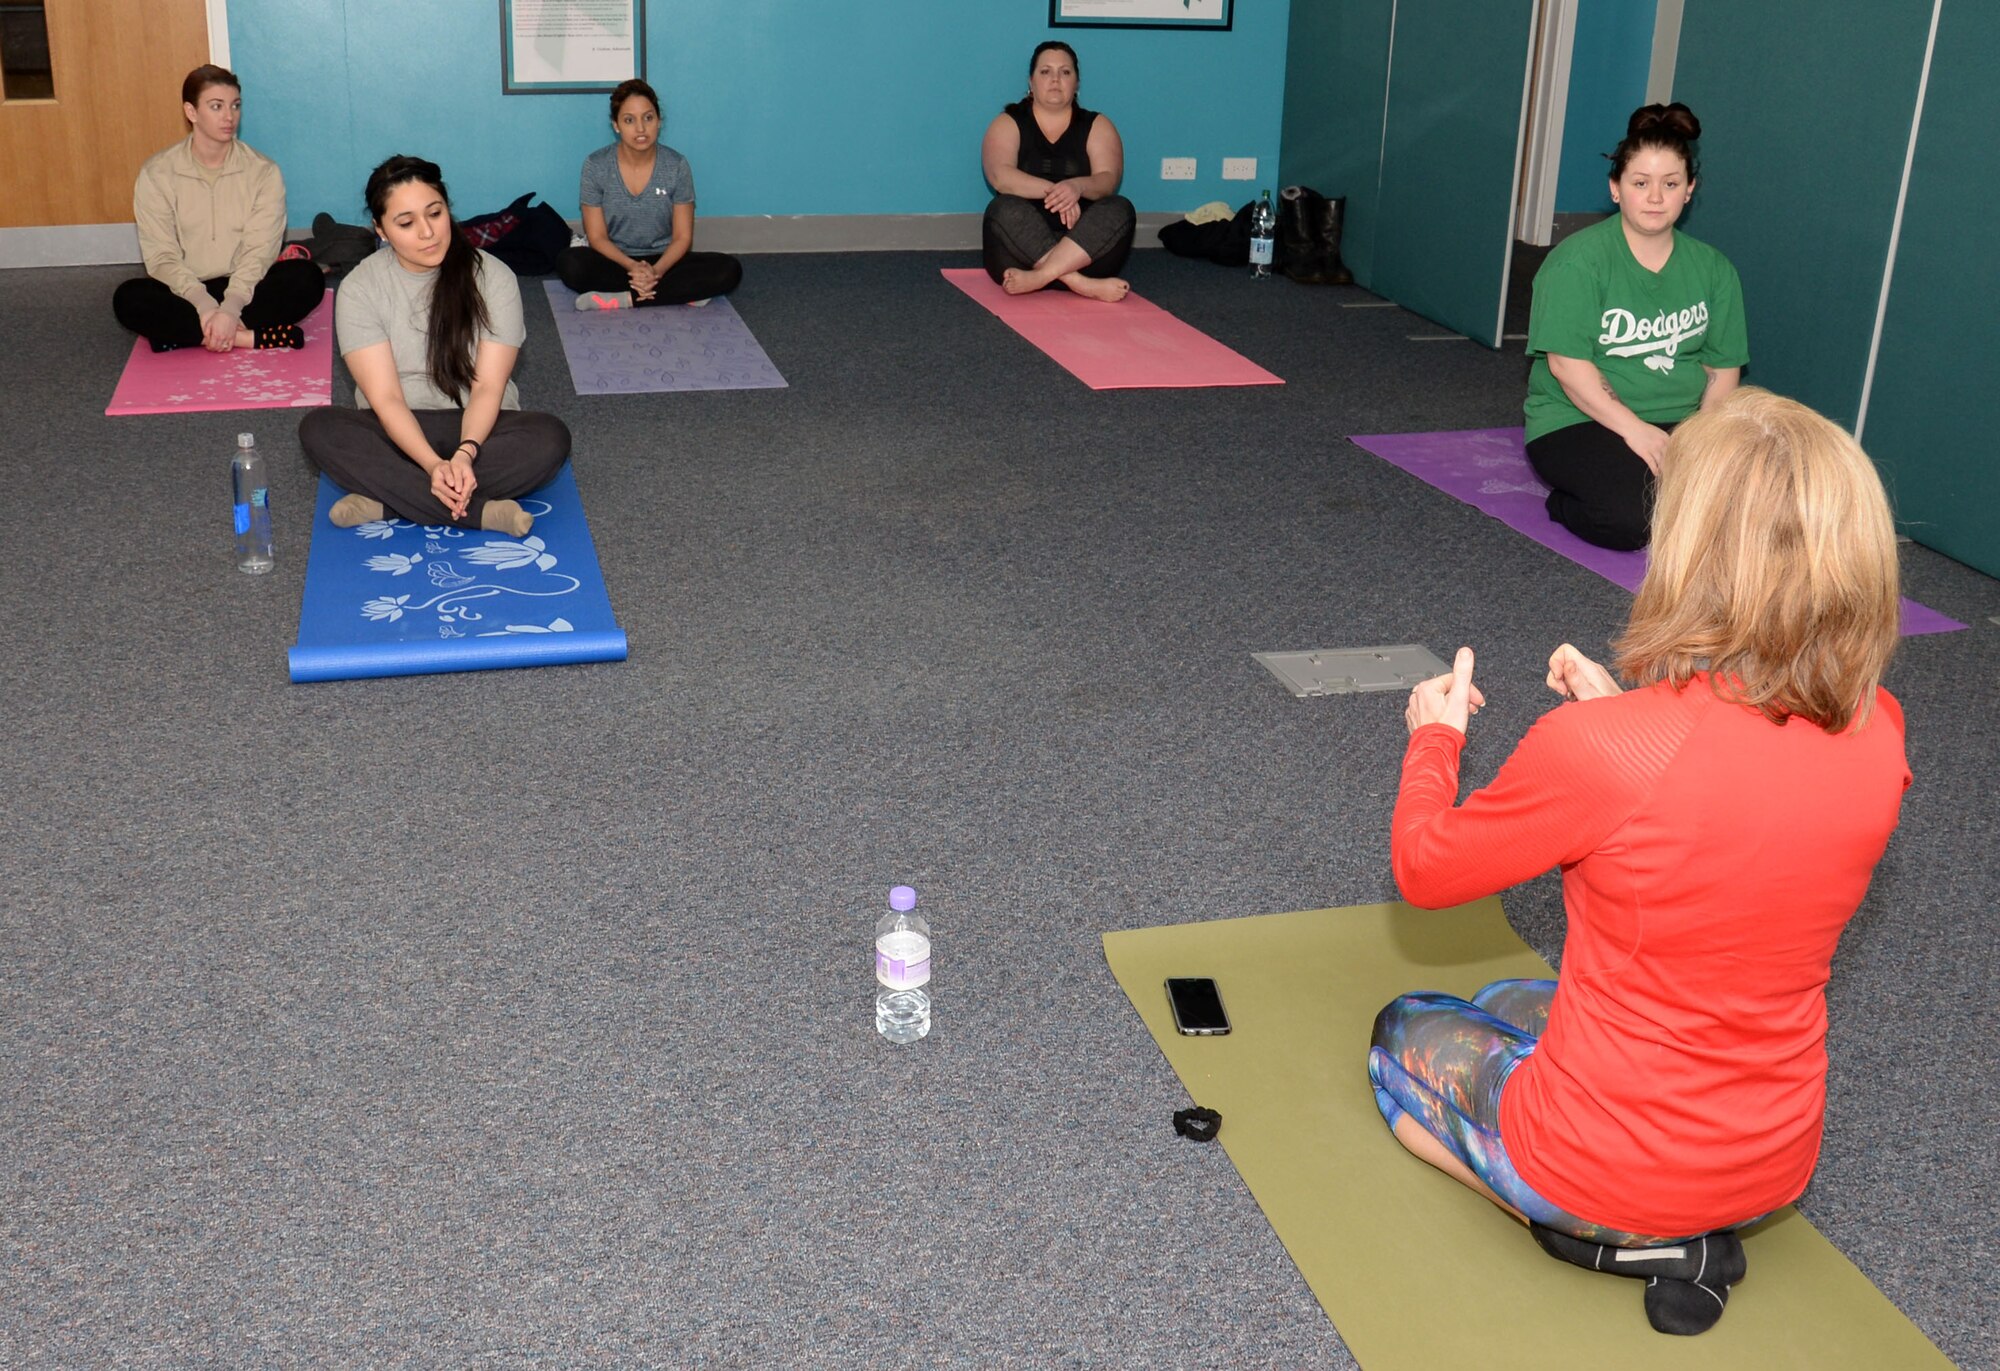 Dana Howard, far right, a yoga instructor, briefs the group during a yoga class hosted by the 100th Air Refueling Wing Sexual Assault Prevention and Response office Jan. 21, 2016, on RAF Mildenhall, England. Howard hopes to encourage more people on base to take up the practice of yoga to help them deal with stress. (U.S. Air Force photo by Gina Randall/Released)